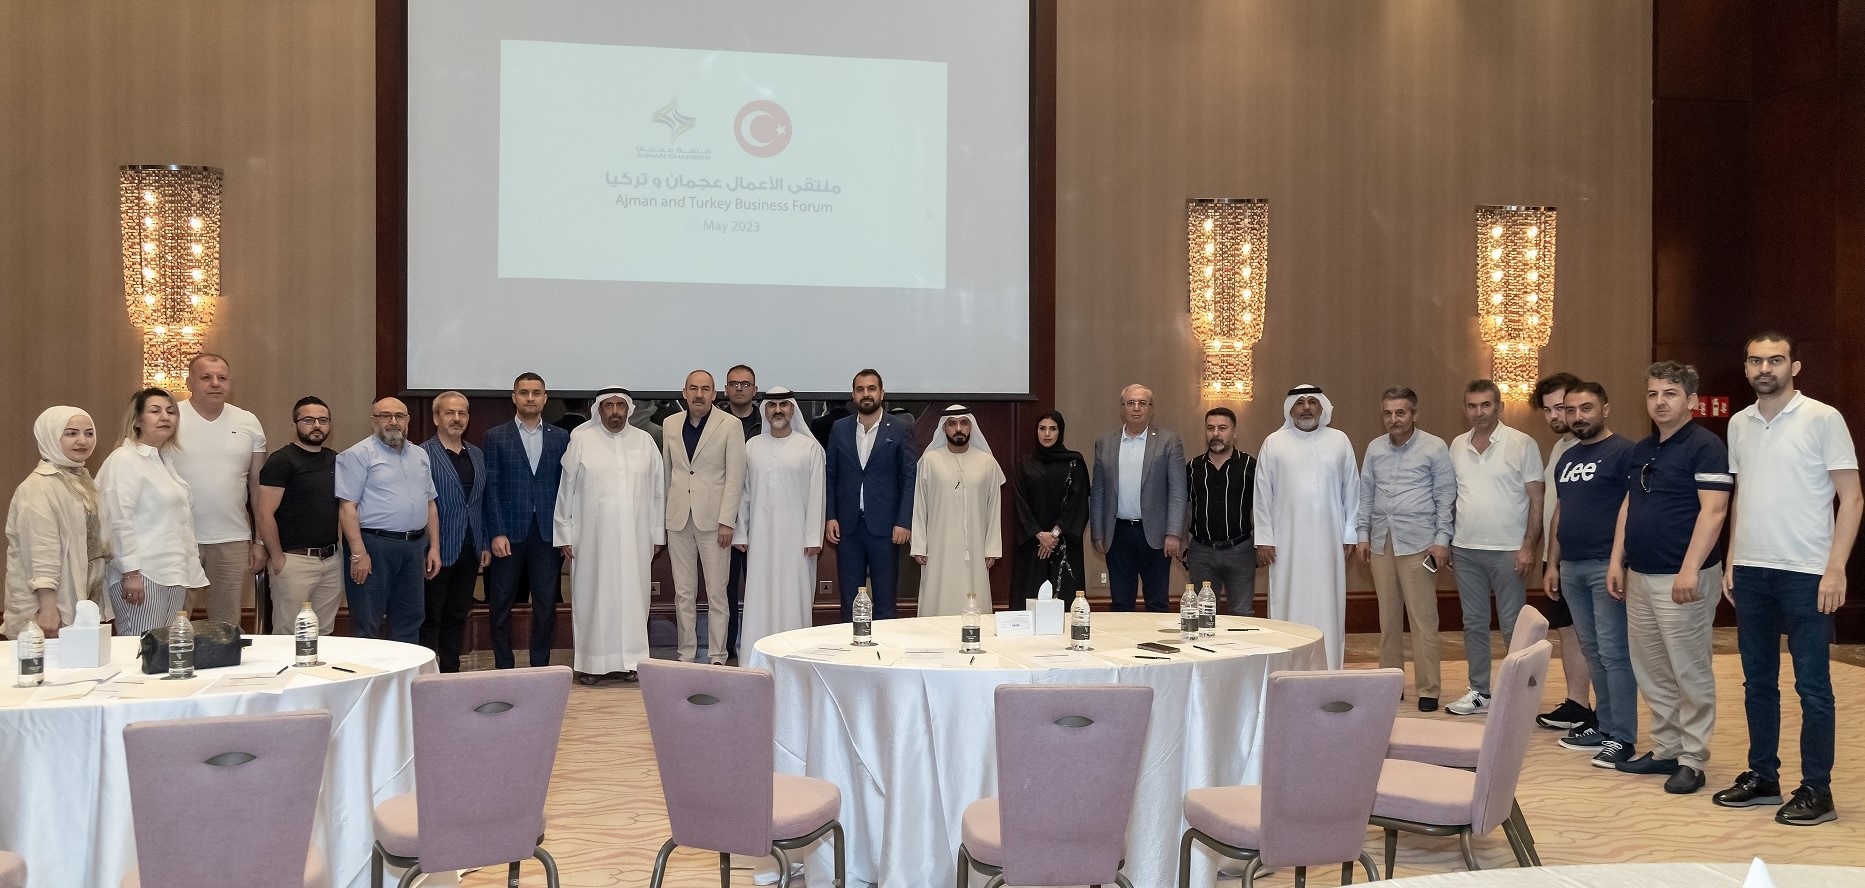 The "Ajman-Turkey" Business Forum Highlights Opportunities For Expansion Of Trade And Investment